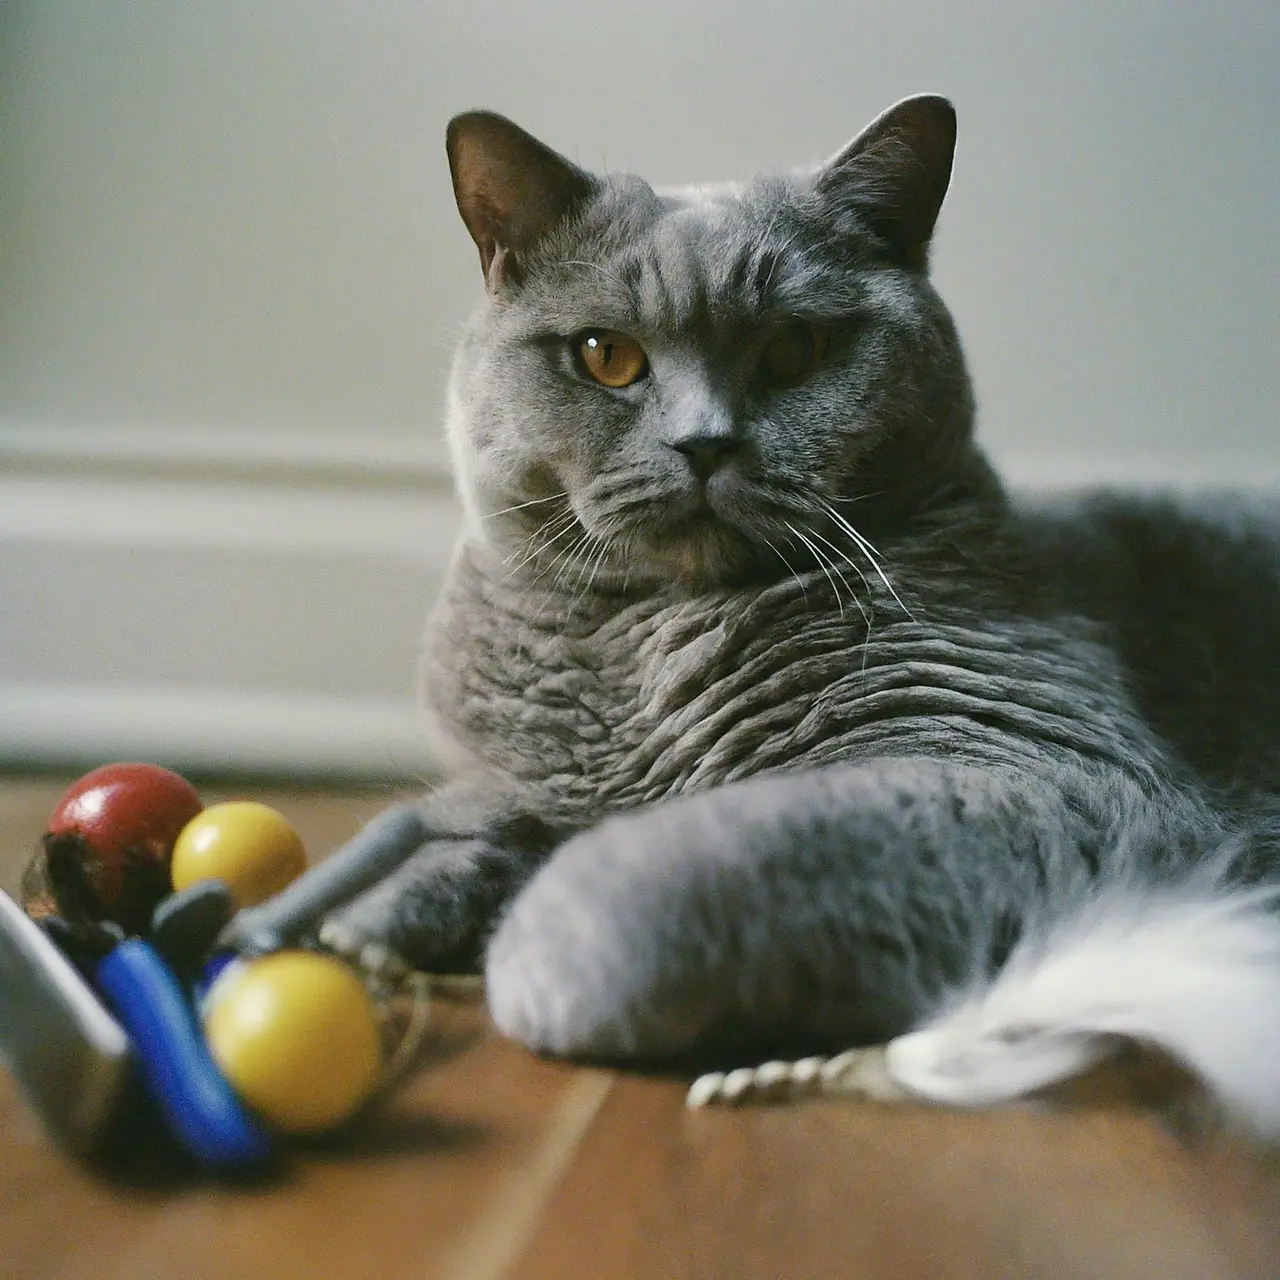 A British Shorthair cat lounging with toys and grooming tools. 35mm stock photo